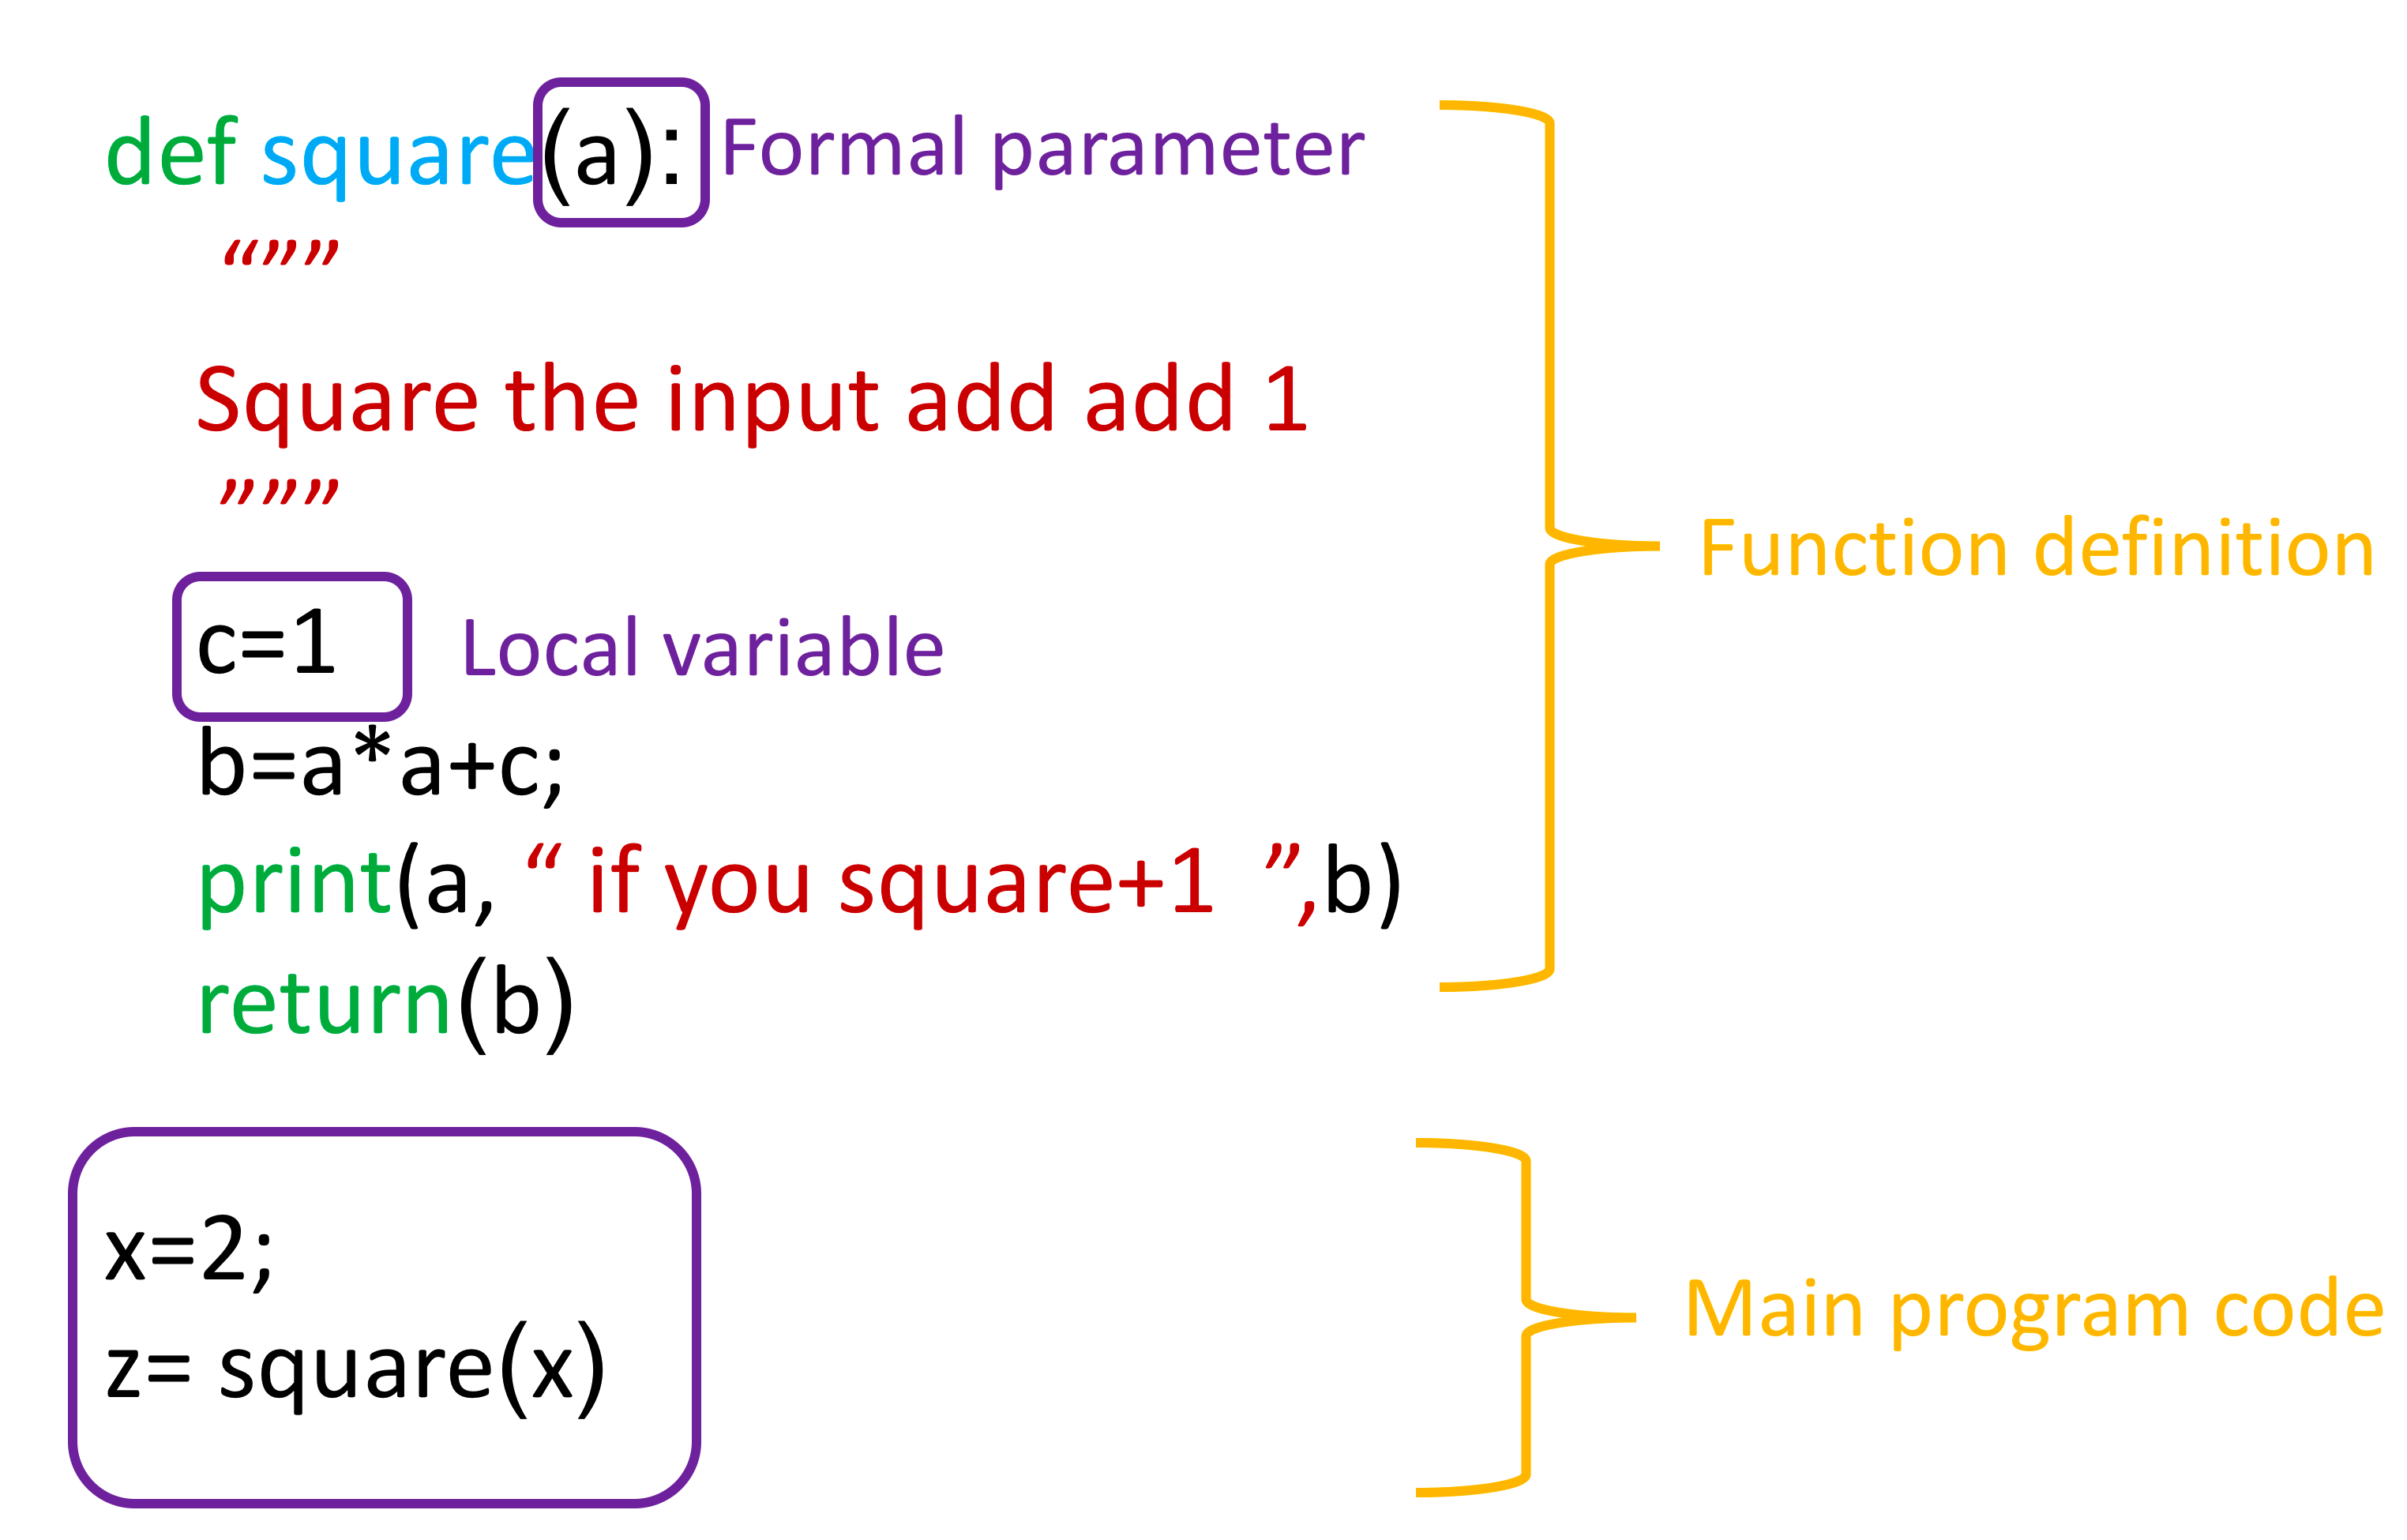 assignment to property of function parameter 'node'